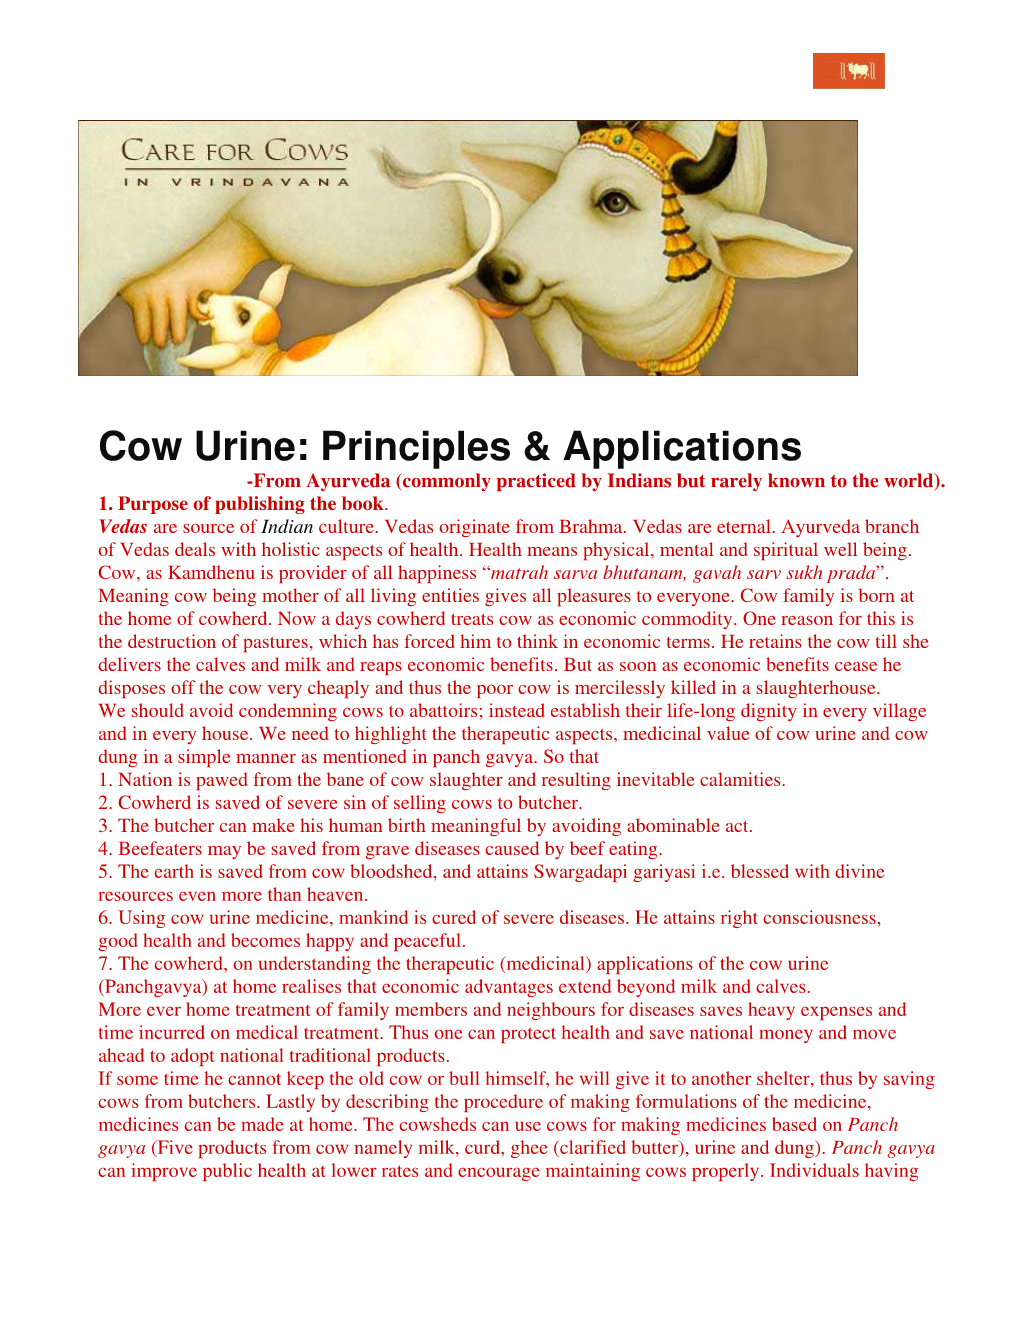 Cow Urine: Principles & Applications -From Ayurveda (Commonly Practiced by Indians but Rarely Known to the World)